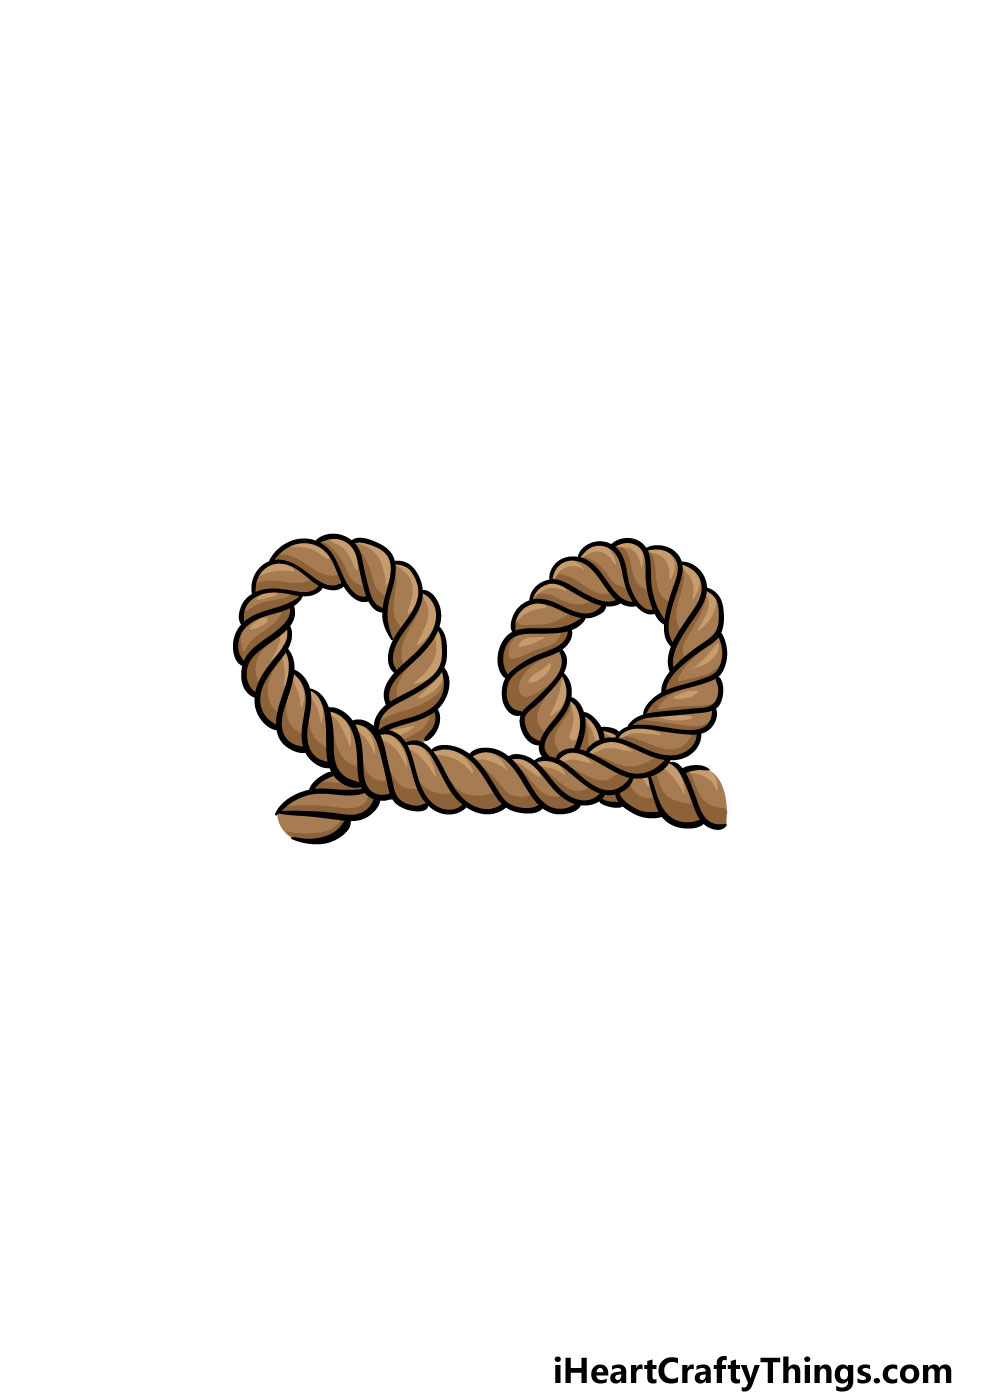 Rope how to draw